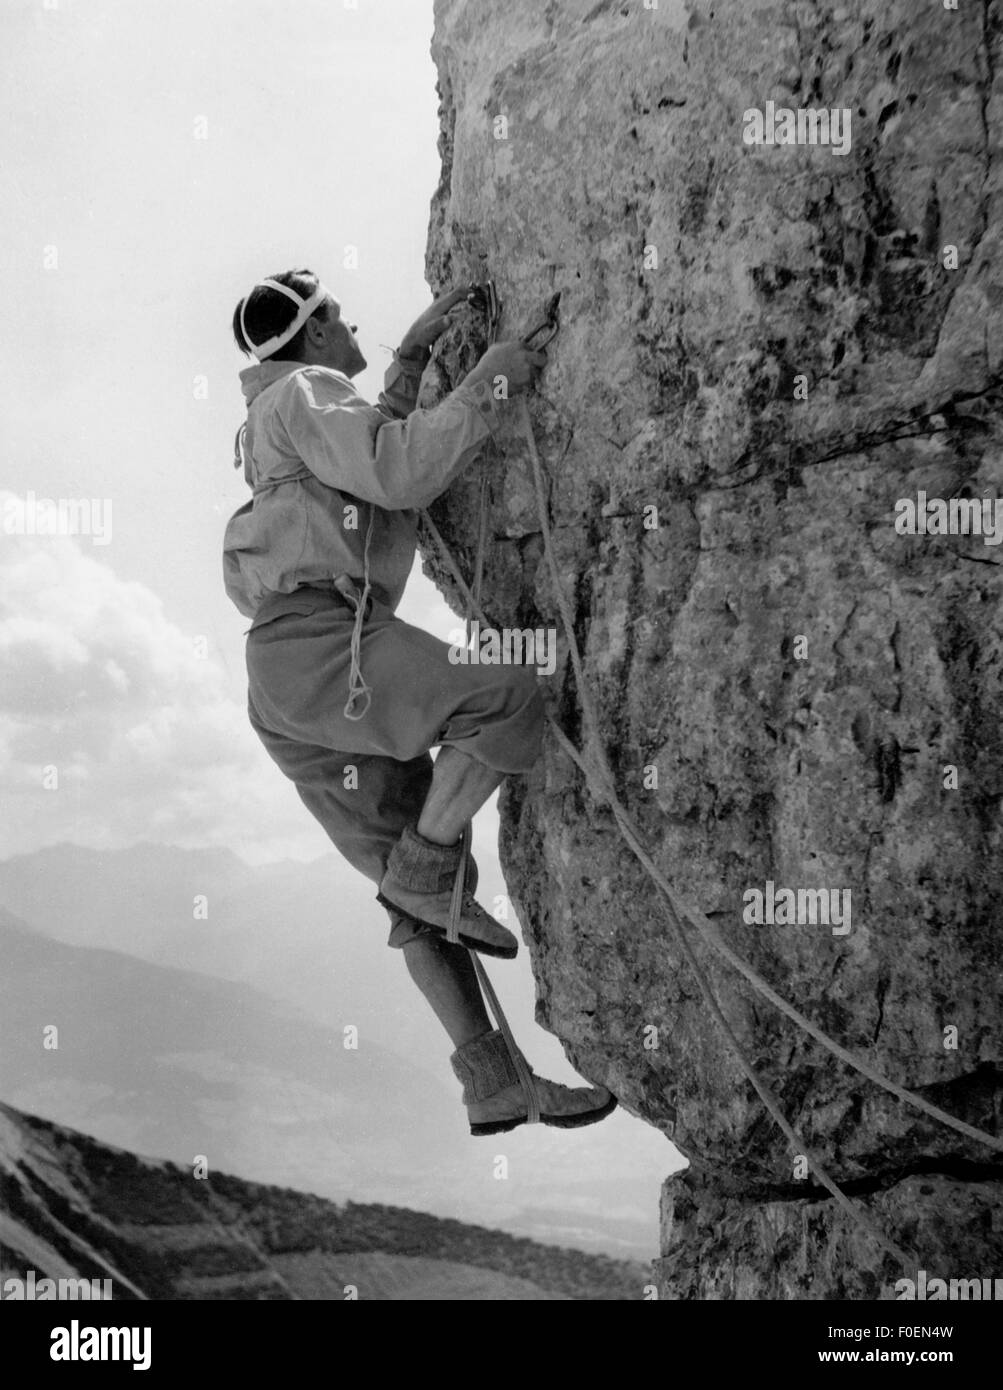 alpinism, mountaineer, climber on a precipitous wall, 1950s, Additional-Rights-Clearences-Not Available Stock Photo